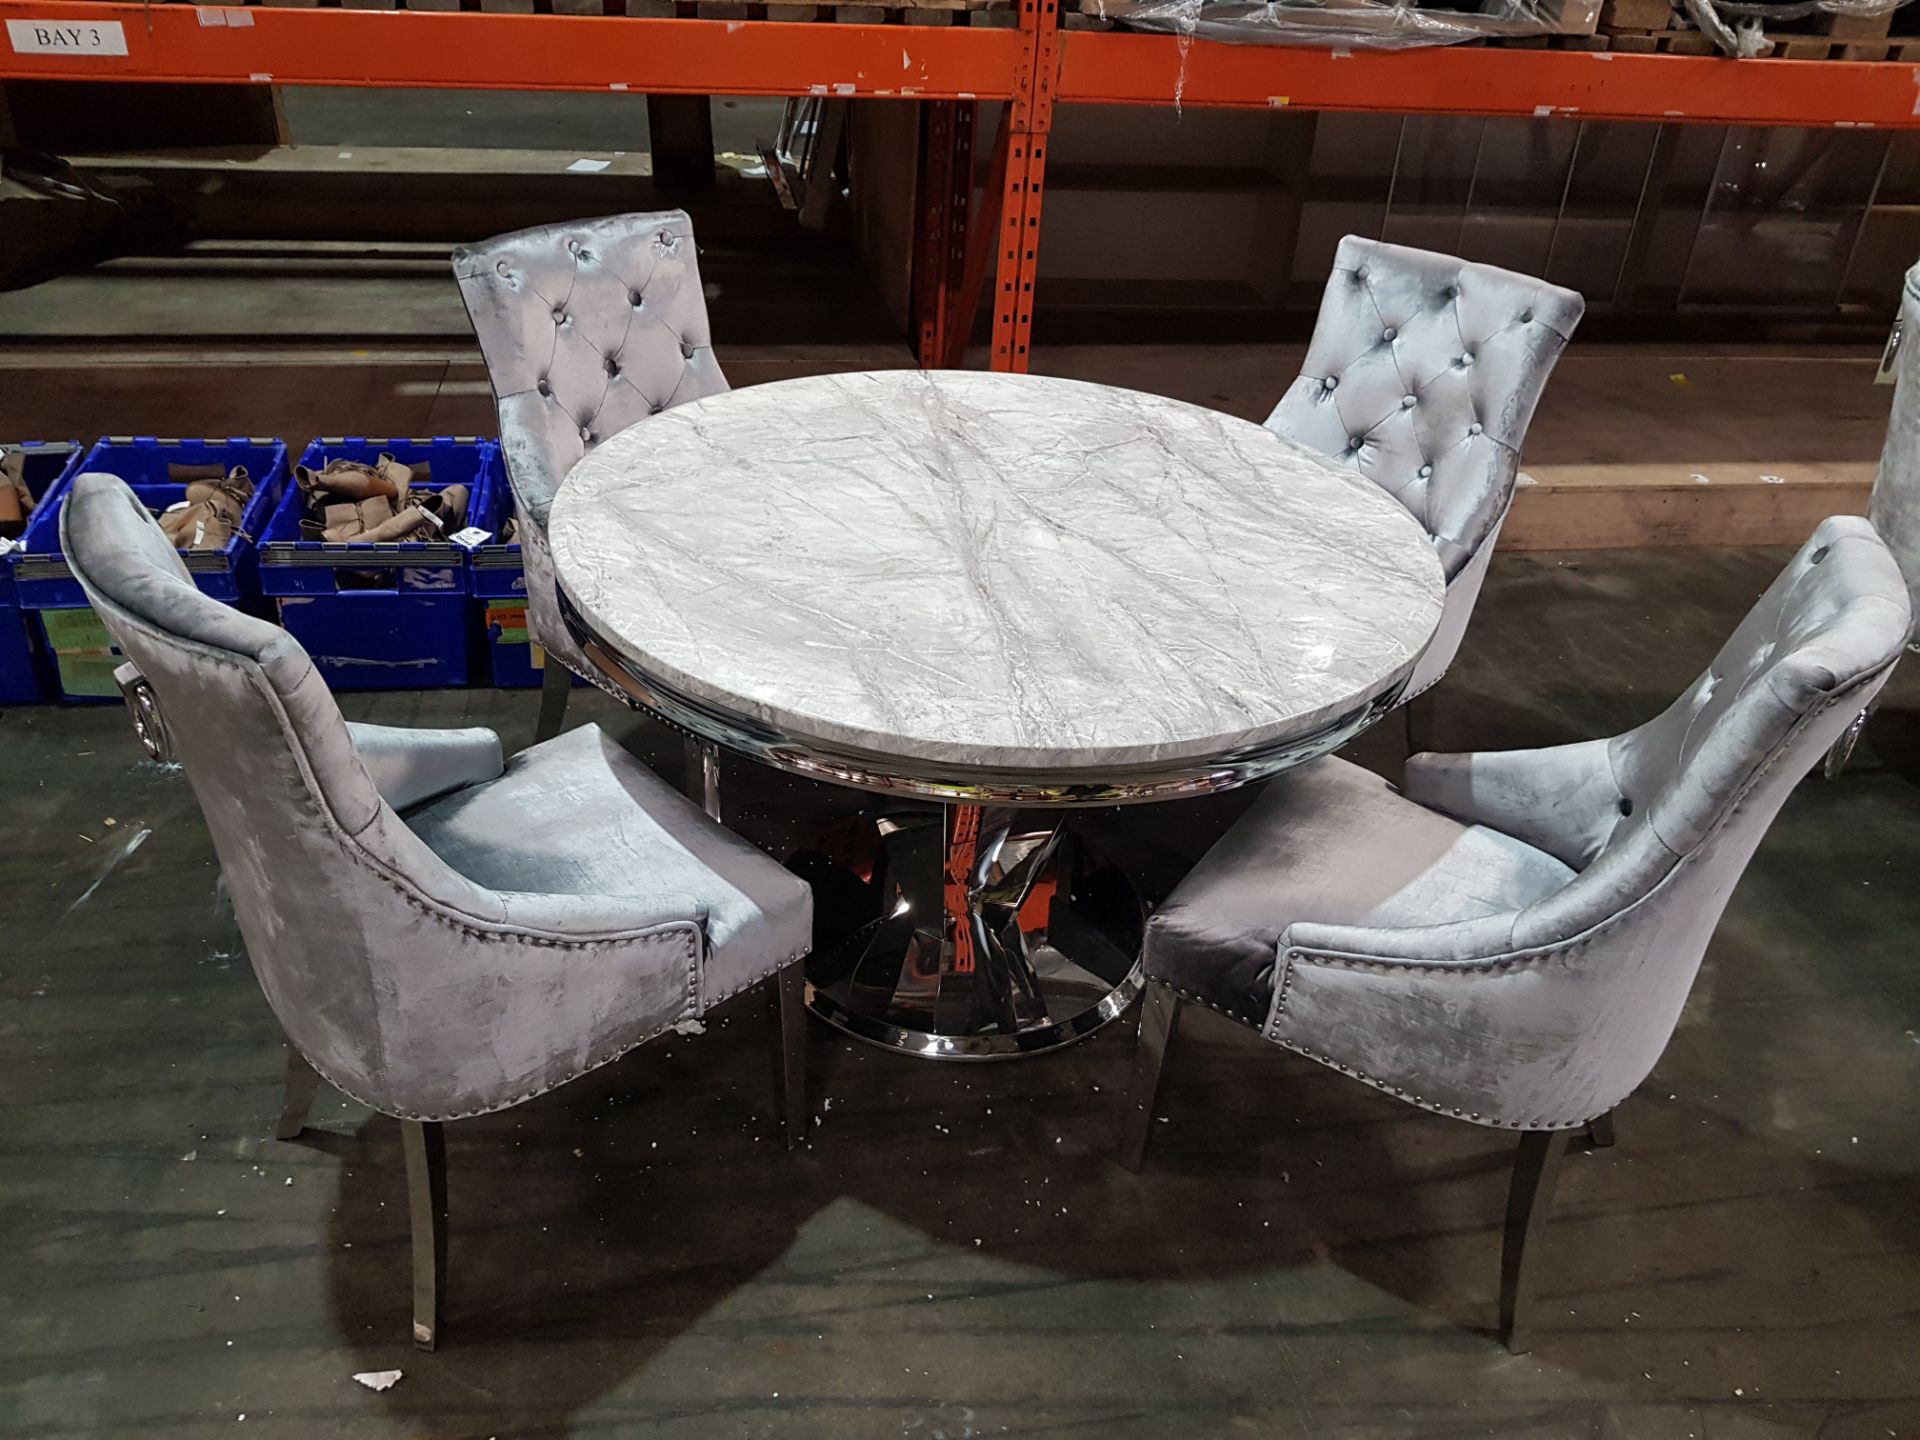 1 X ARTURO ROUND MARBLE TOP DINING TABLE WITH 4 SILVER VELVET BUTTONED BACK CHAIRS ( DIAMETER 130 CM - Image 2 of 2